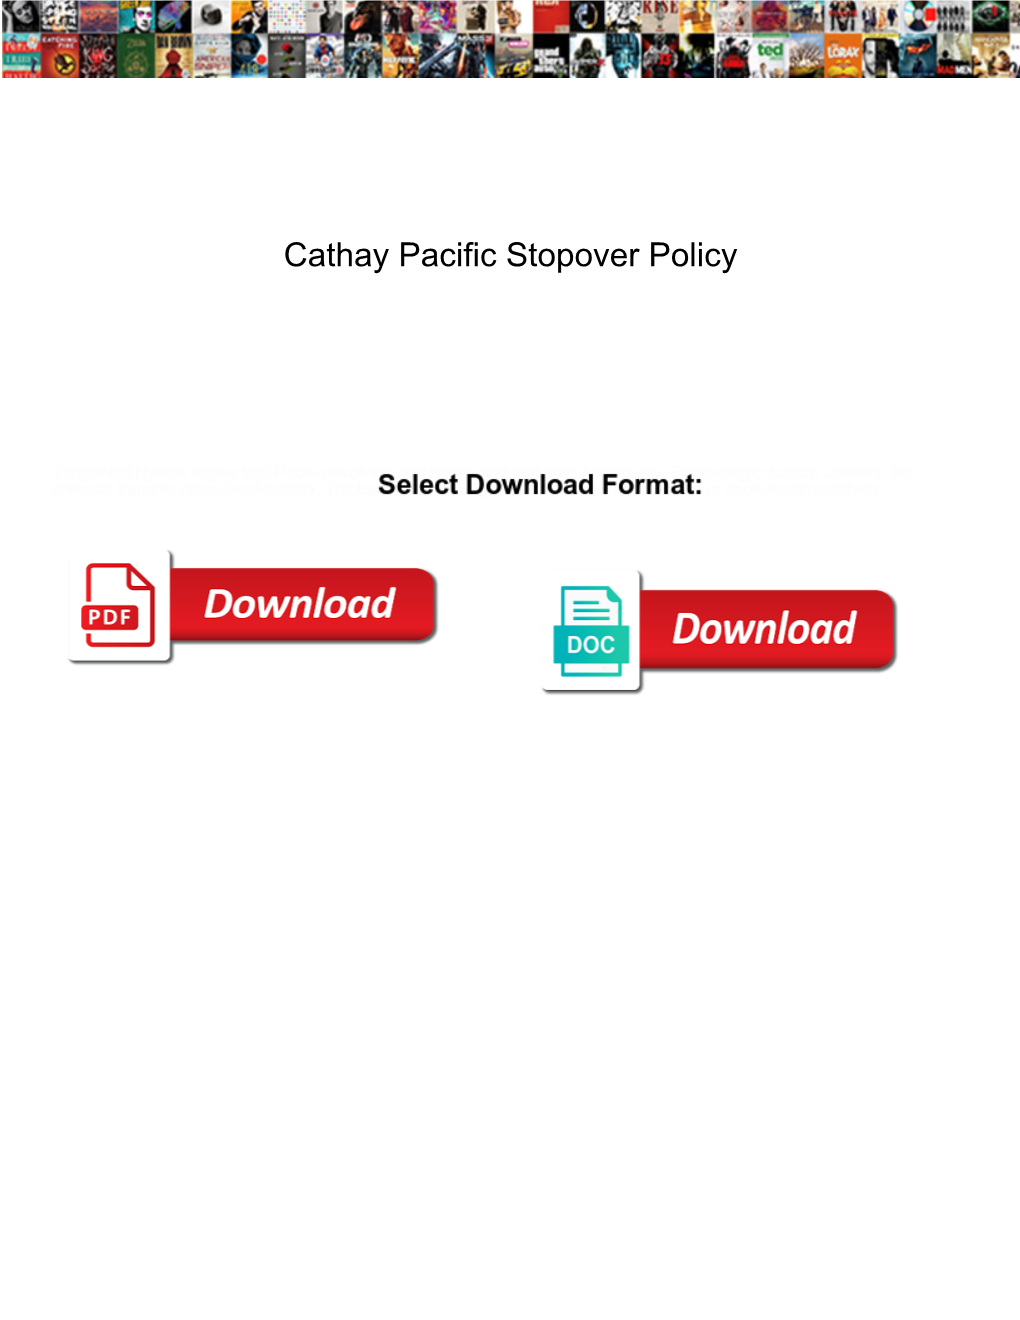 Cathay Pacific Stopover Policy